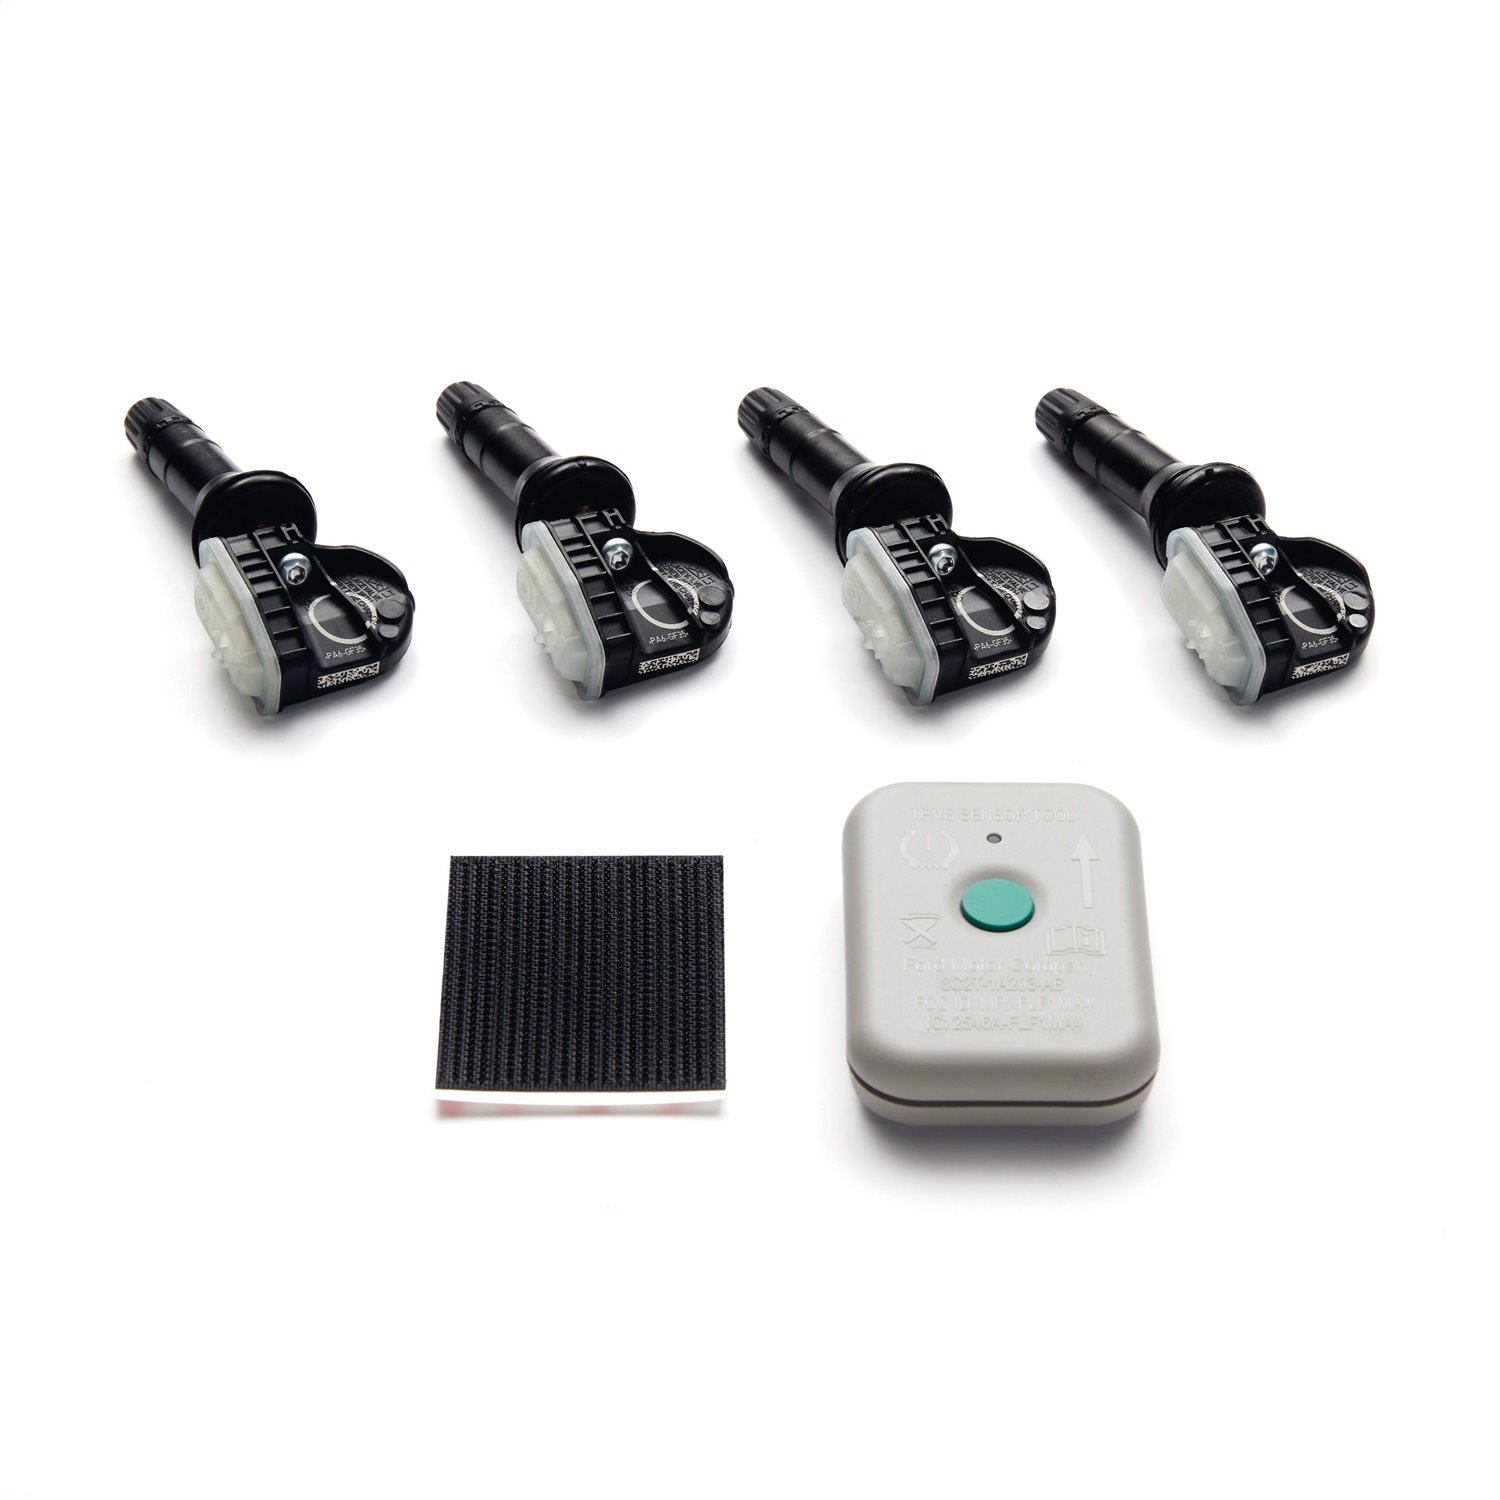 TPMS Sensor and Activation Tool Kit for Select